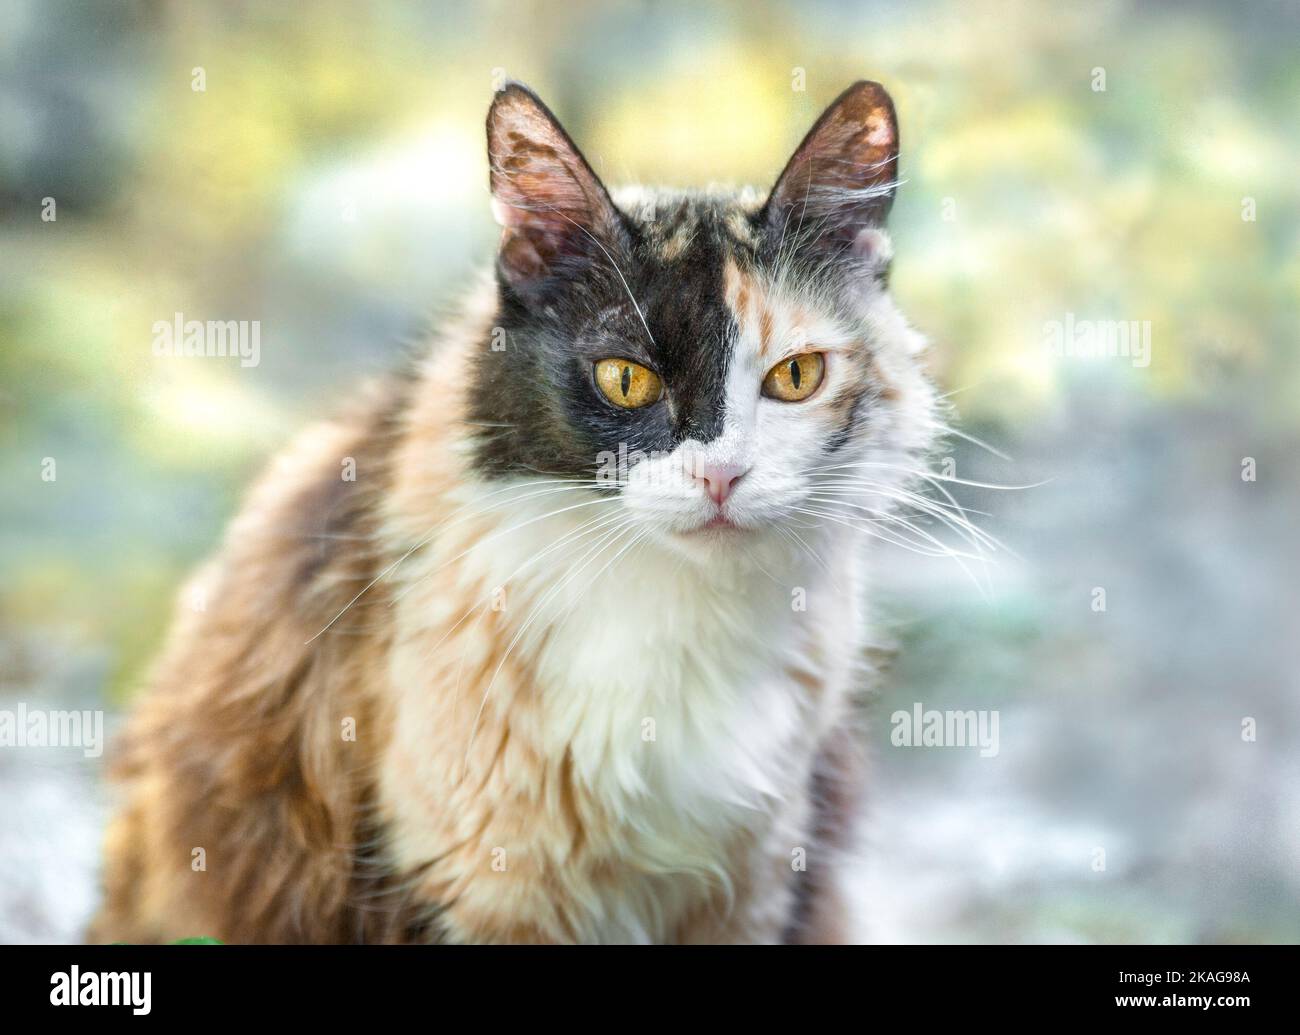 Calico cat with intense stare Stock Photo